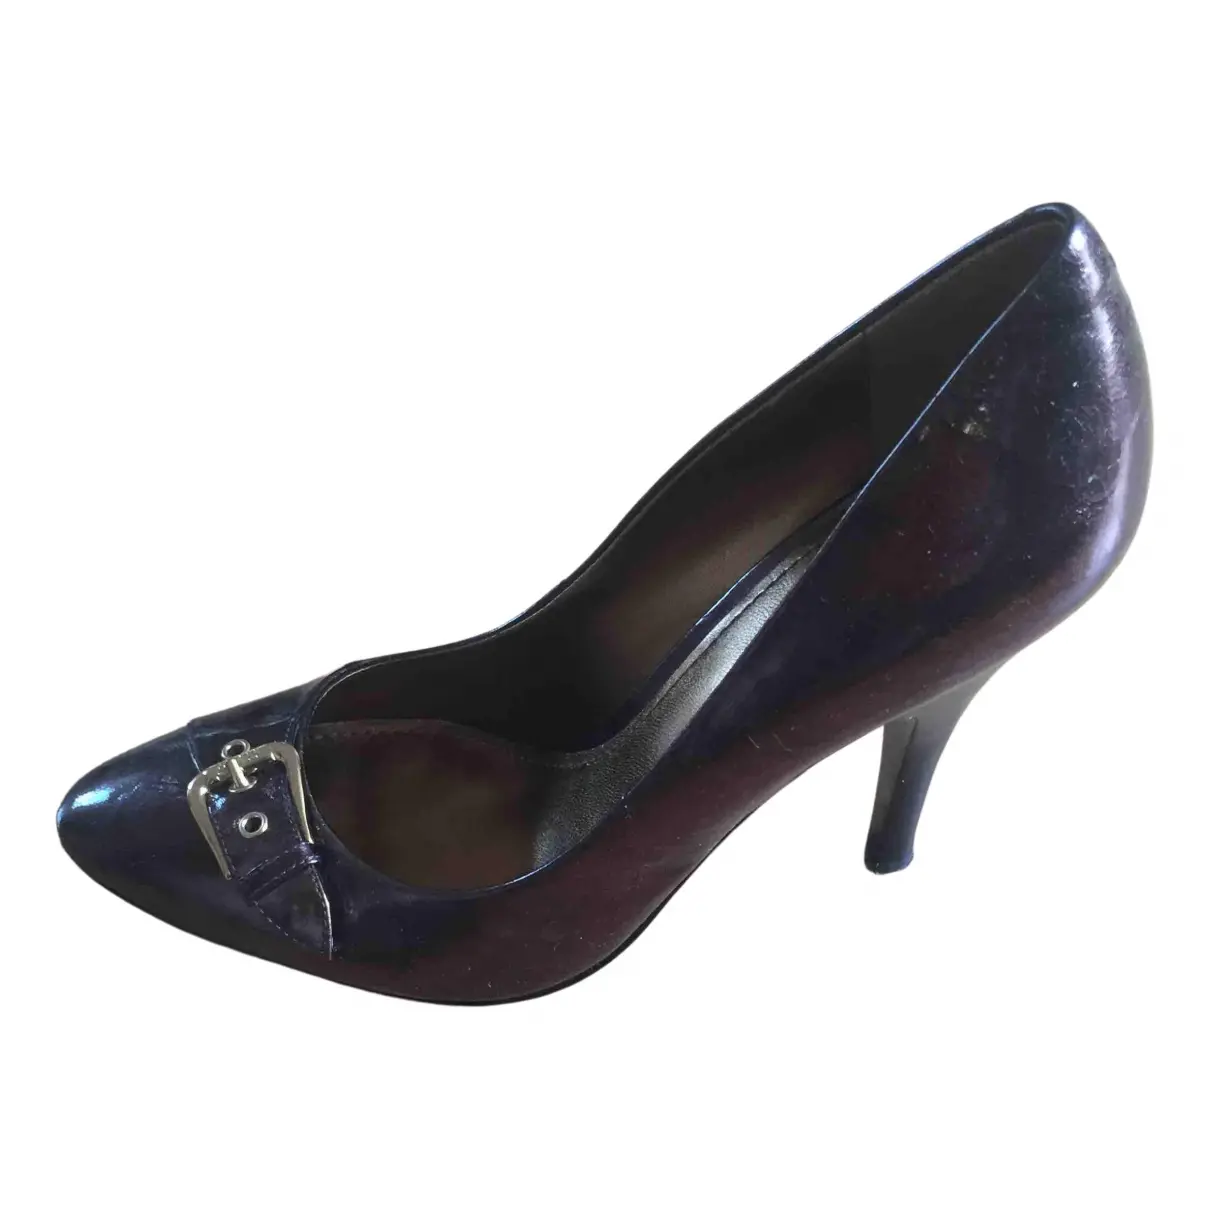 Patent leather heels GUESS